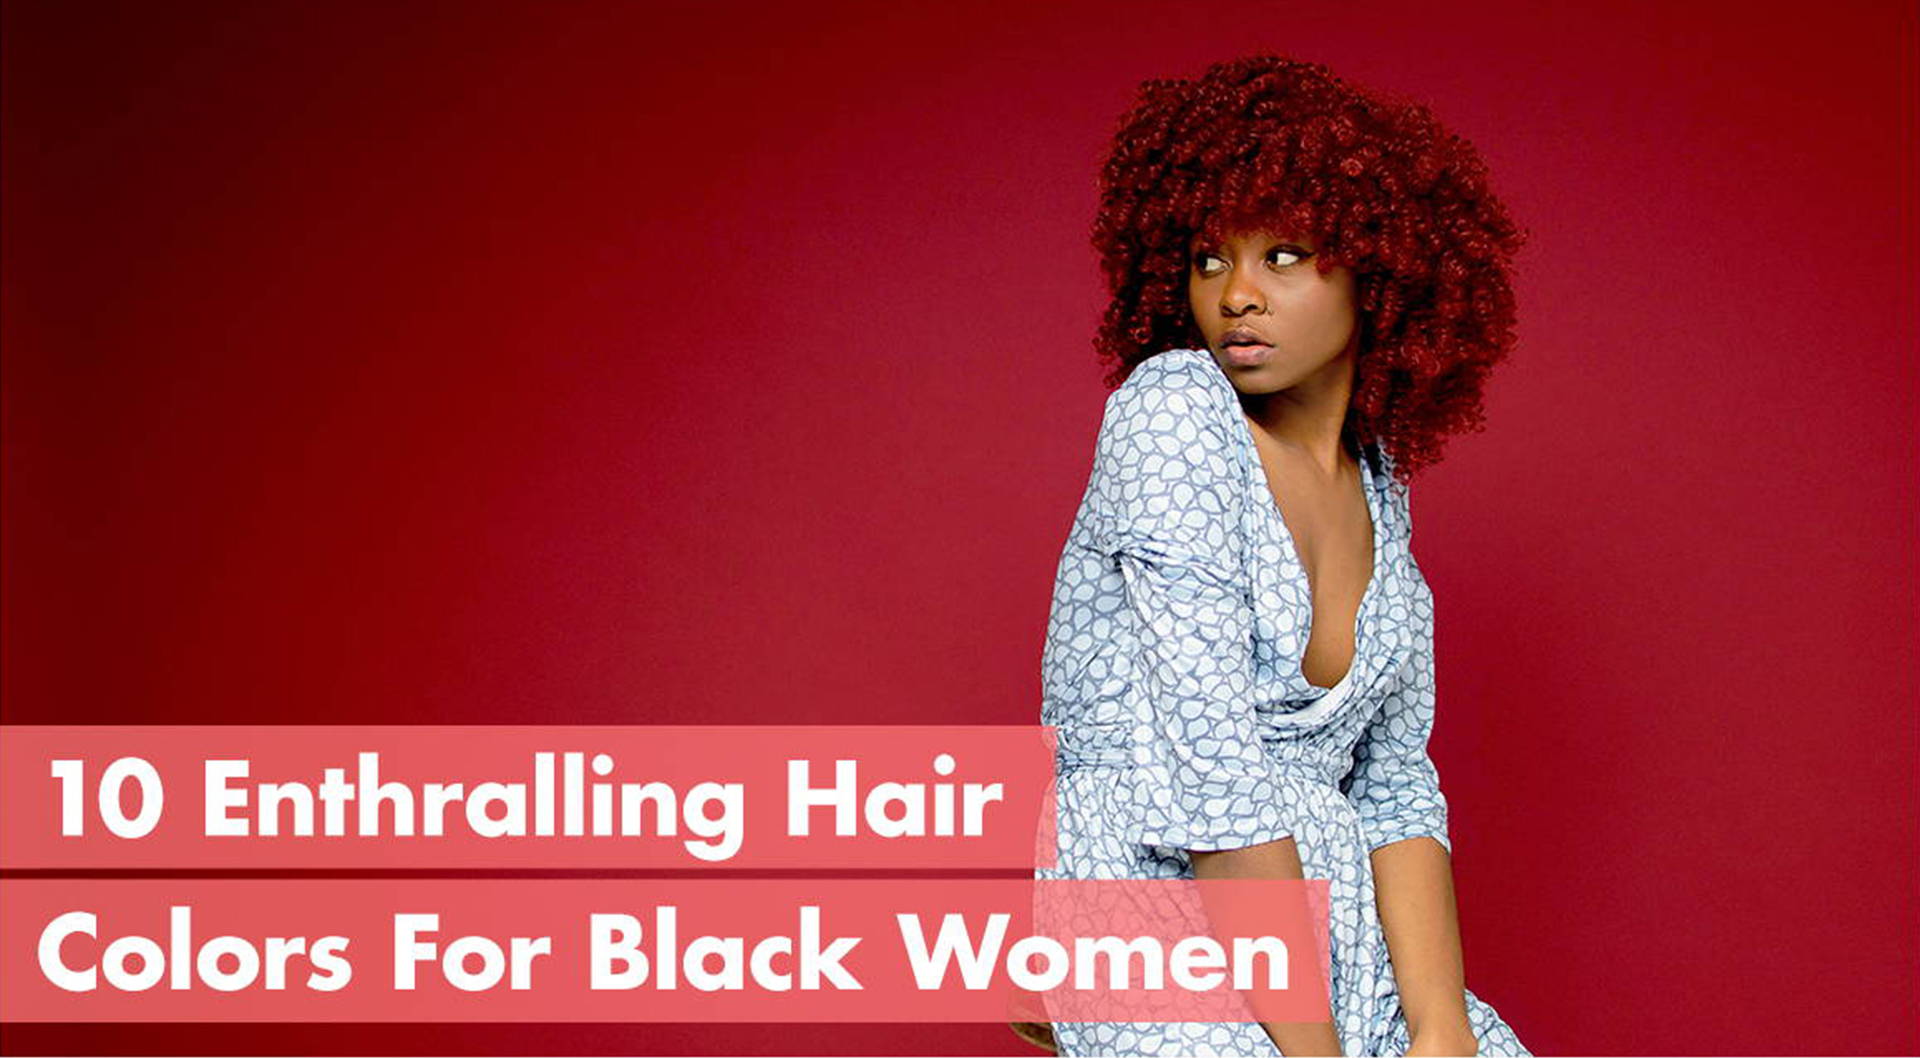 Enthralling Hair Colors For Black